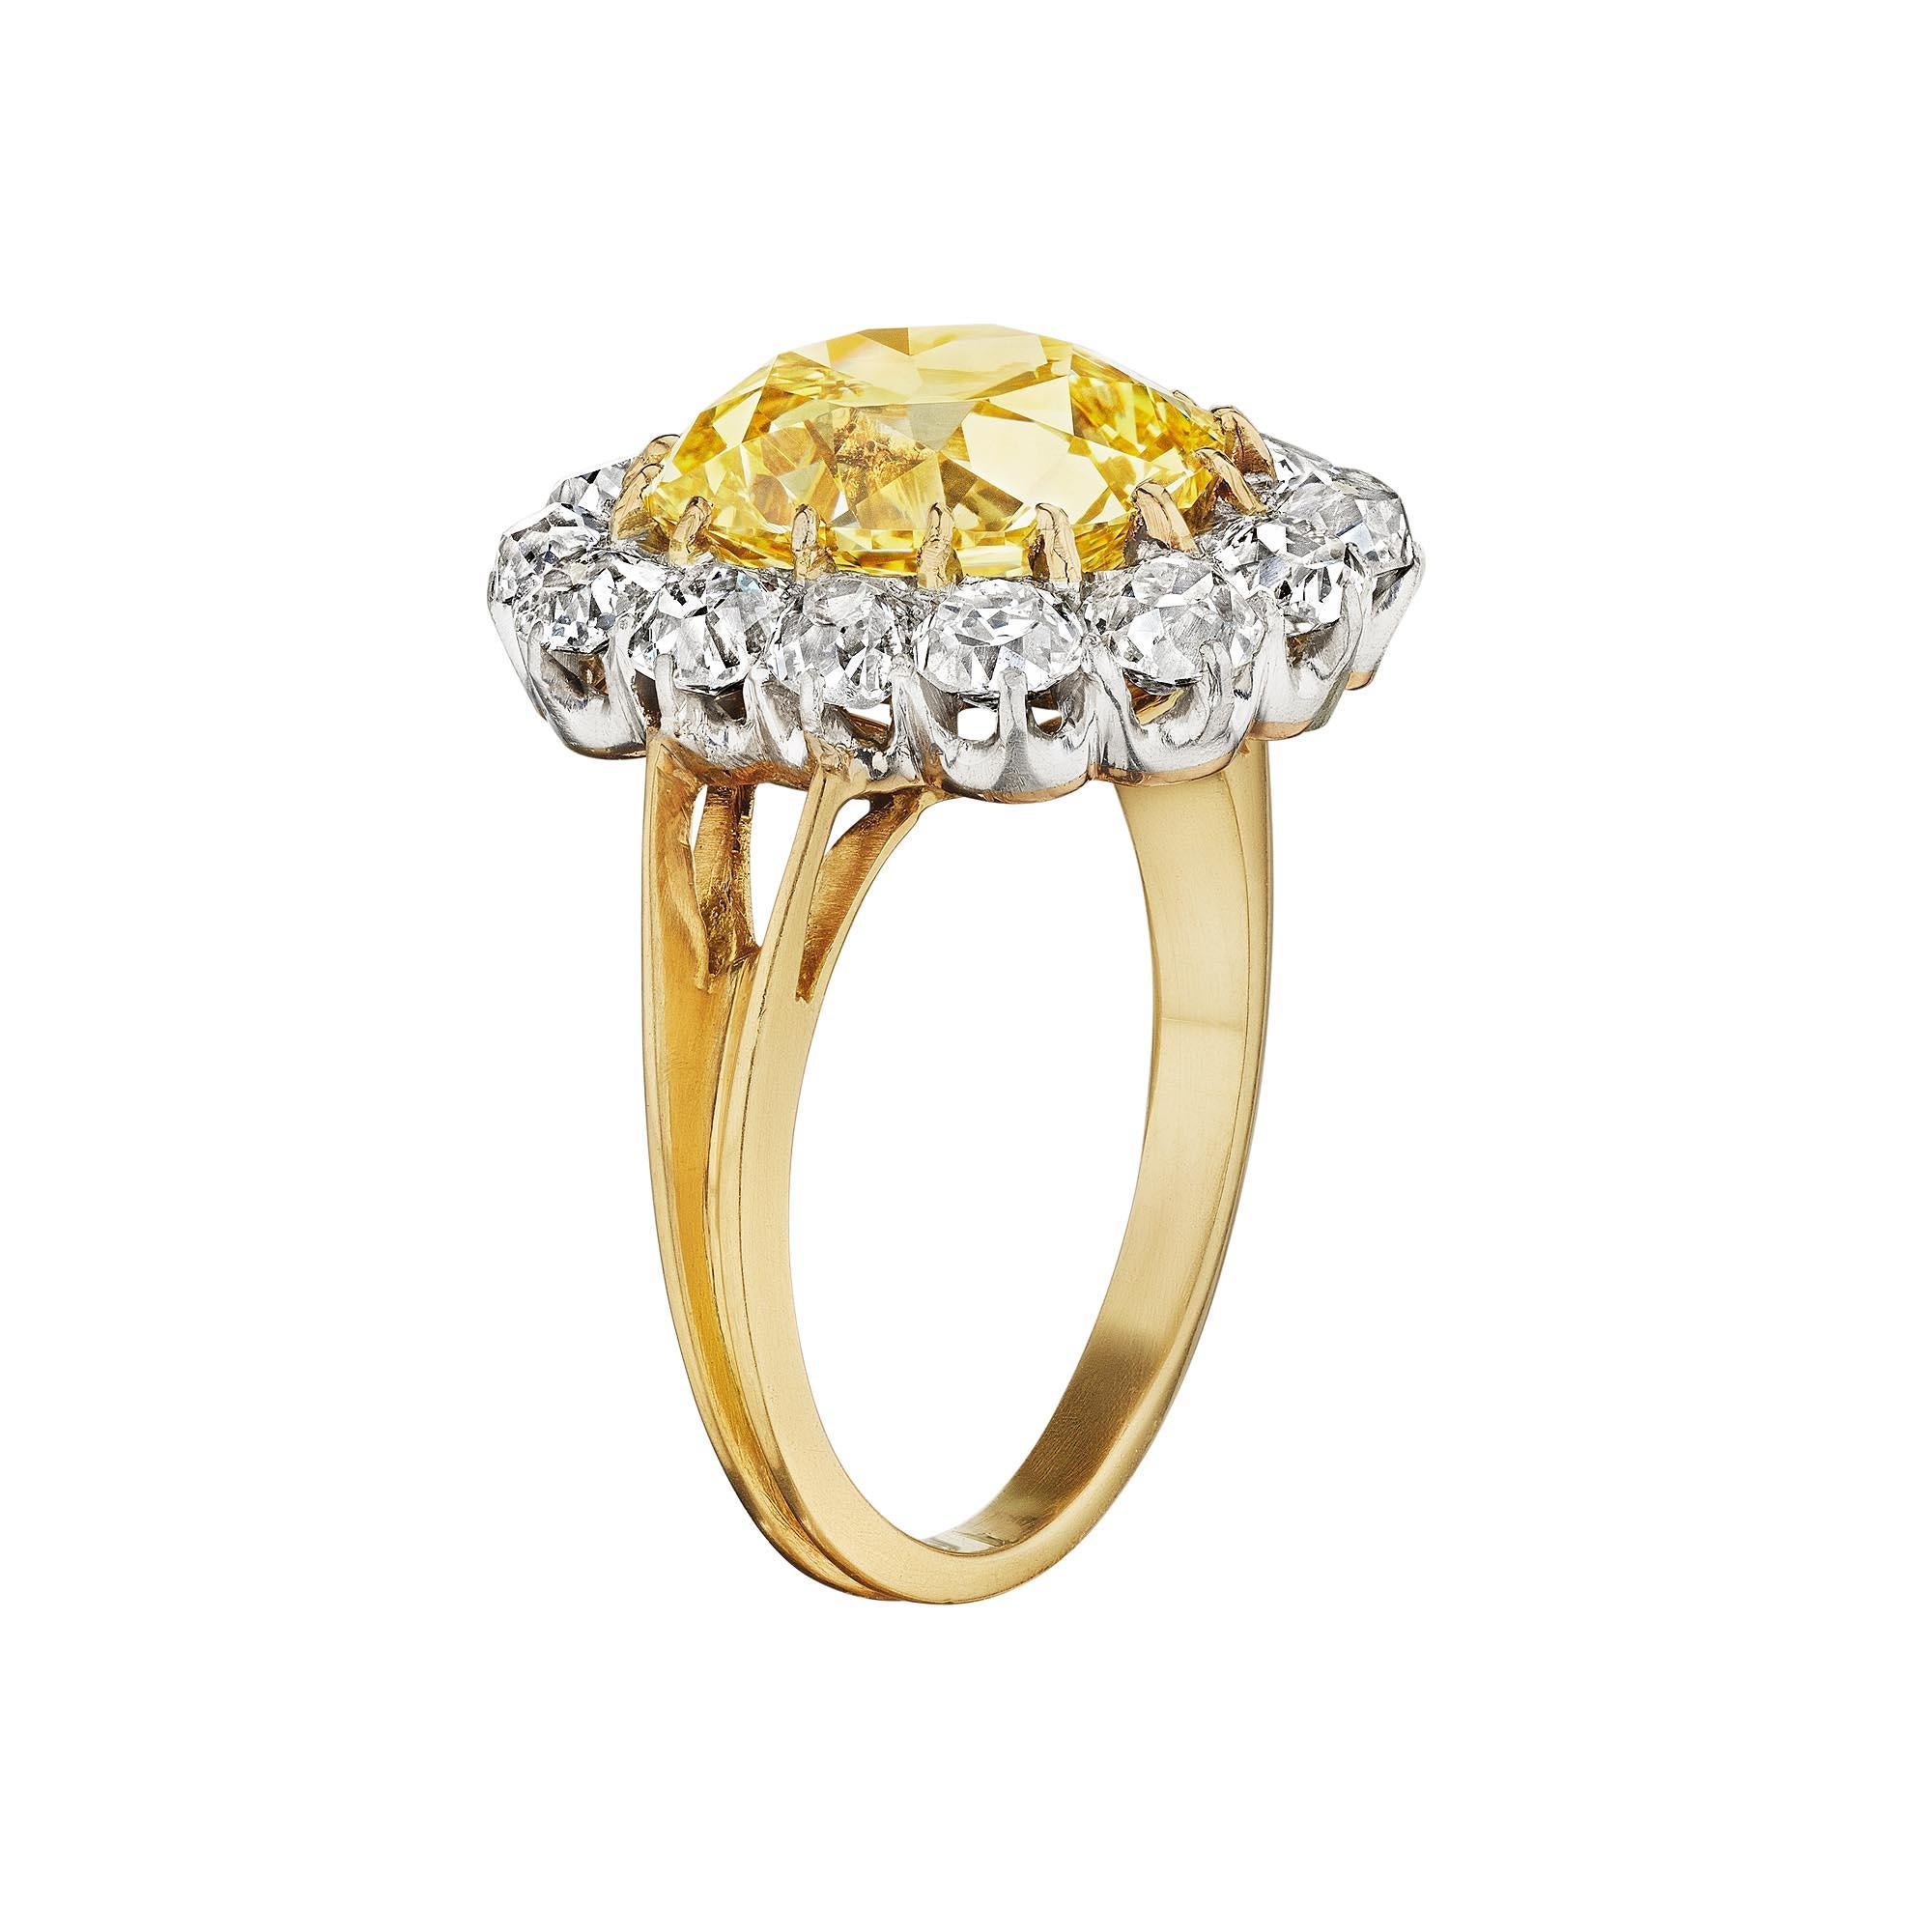 Let the sun shine in with this Art Nouveau 4.23 carat old mine brilliant cushion cut fancy intense yellow diamond ring.  The scintillating center yellow diamond is surrounded by a total of 1.50 carats of fiery round cut white diamonds creating a